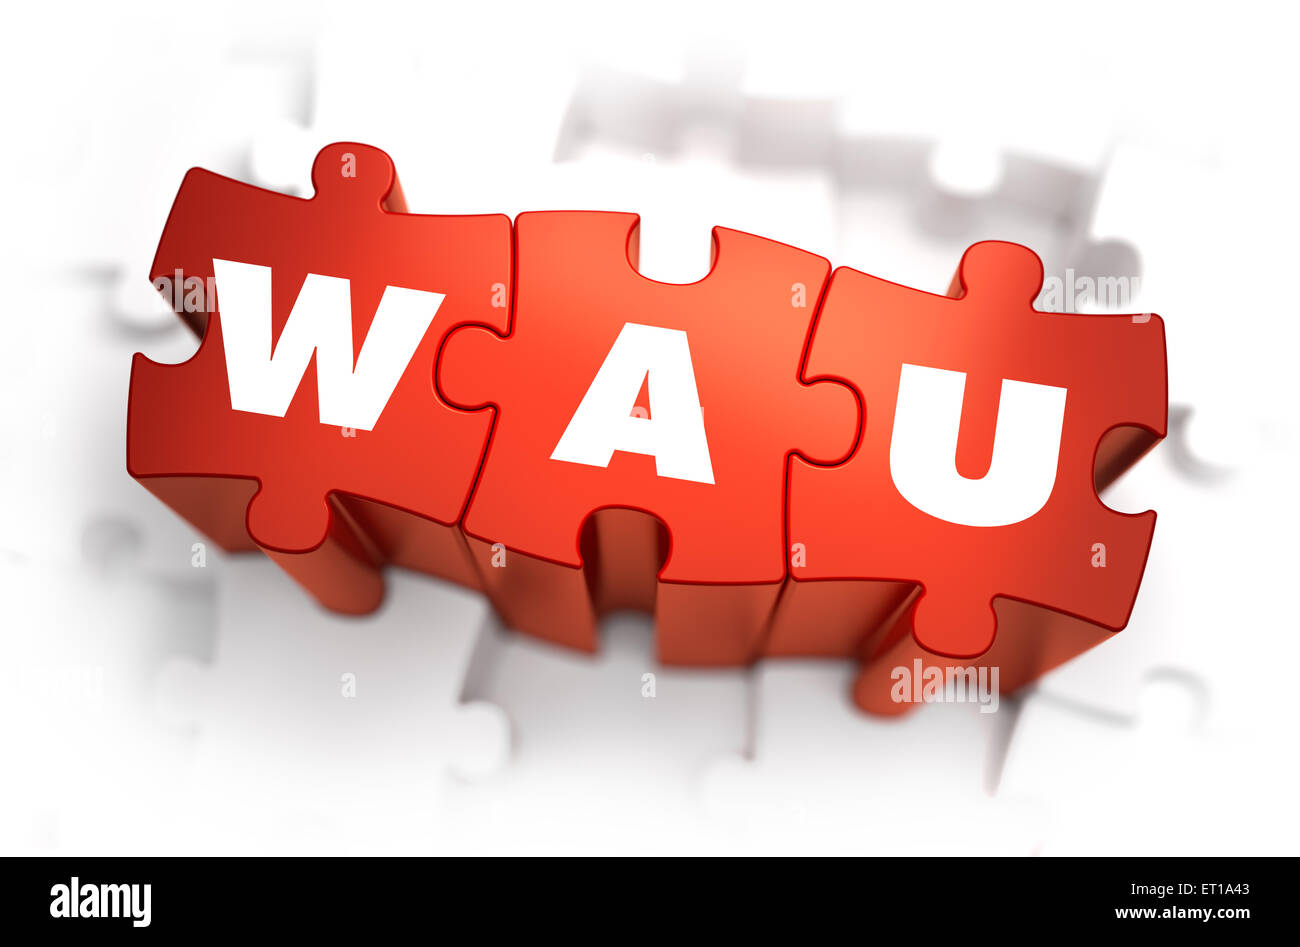 Word - WAU on Red Puzzles. Stock Photo